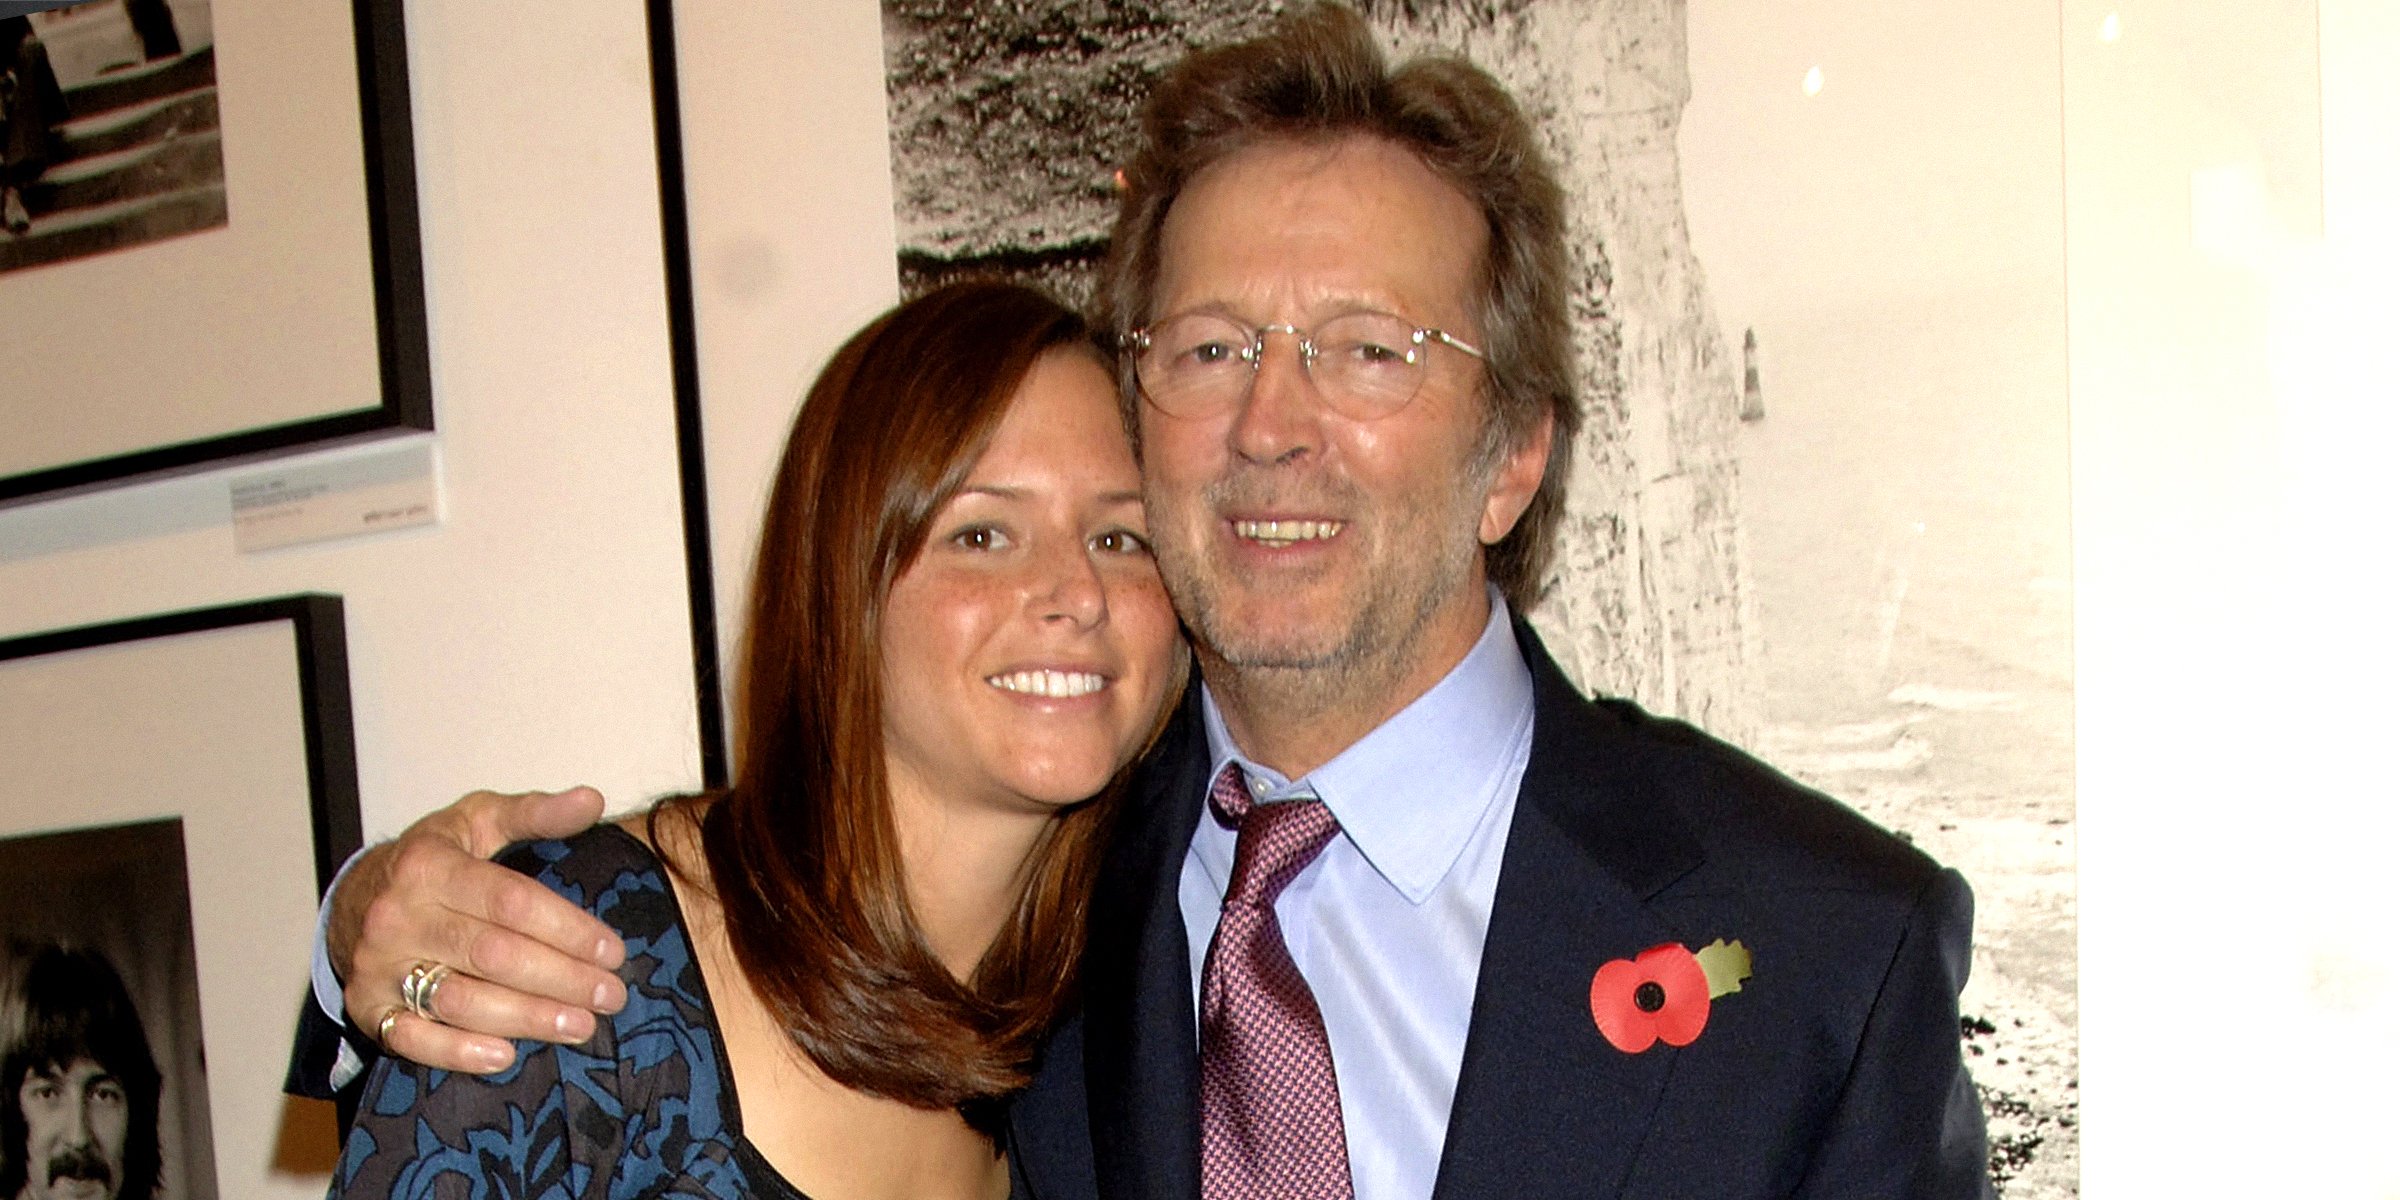 Melia McEnery and Eric Clapton | Source: Getty Images